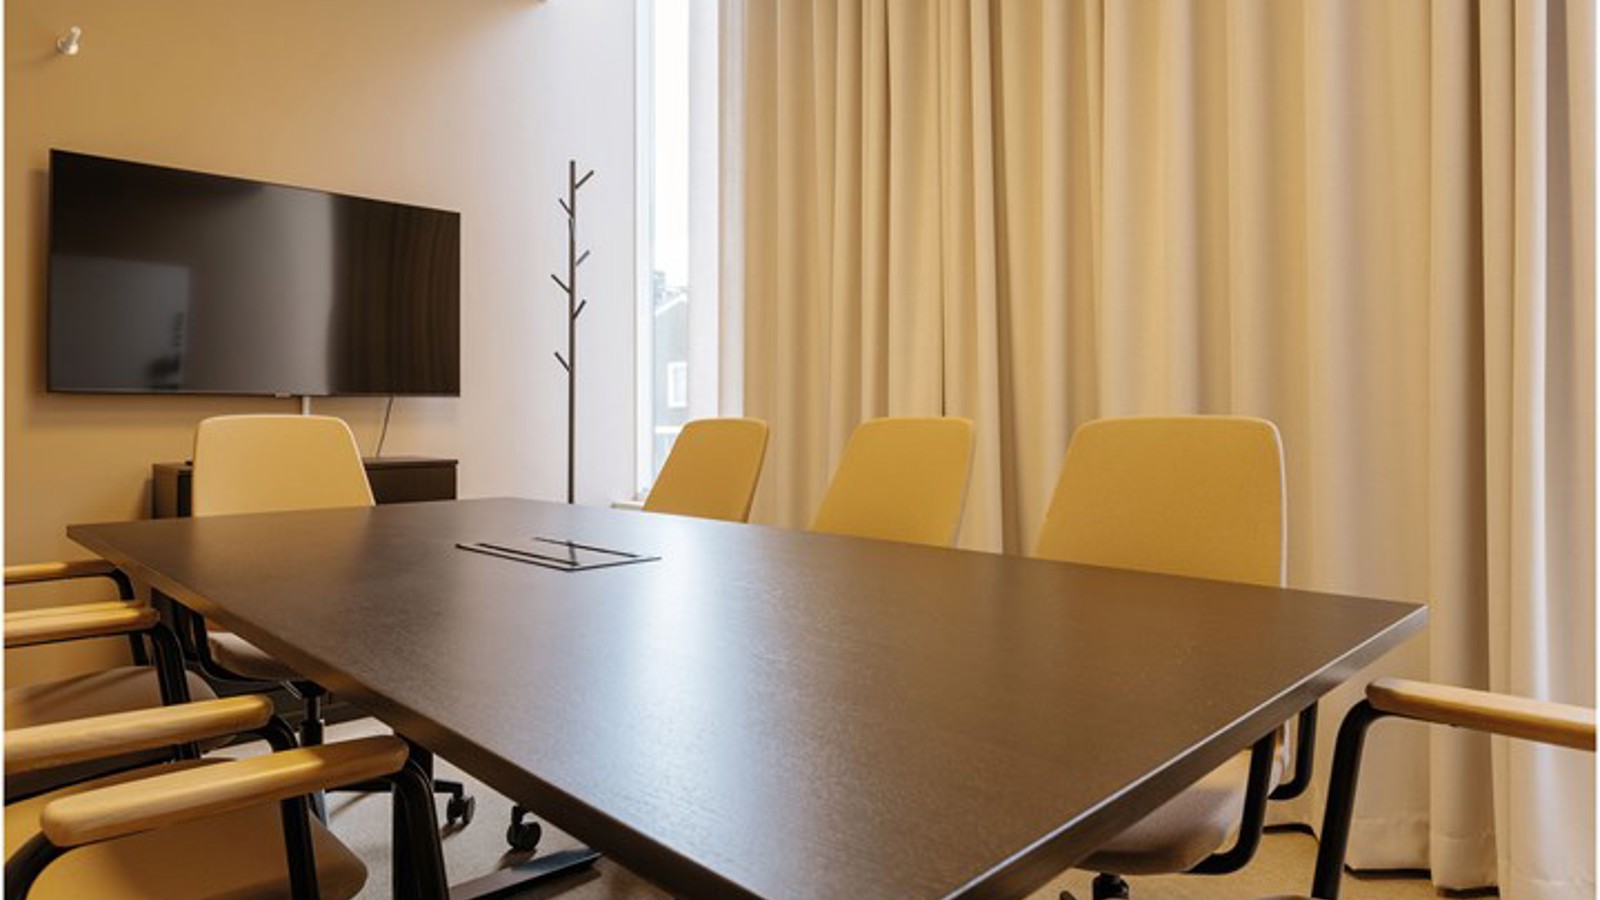 Conference room with board seating in yellow tones and brown table